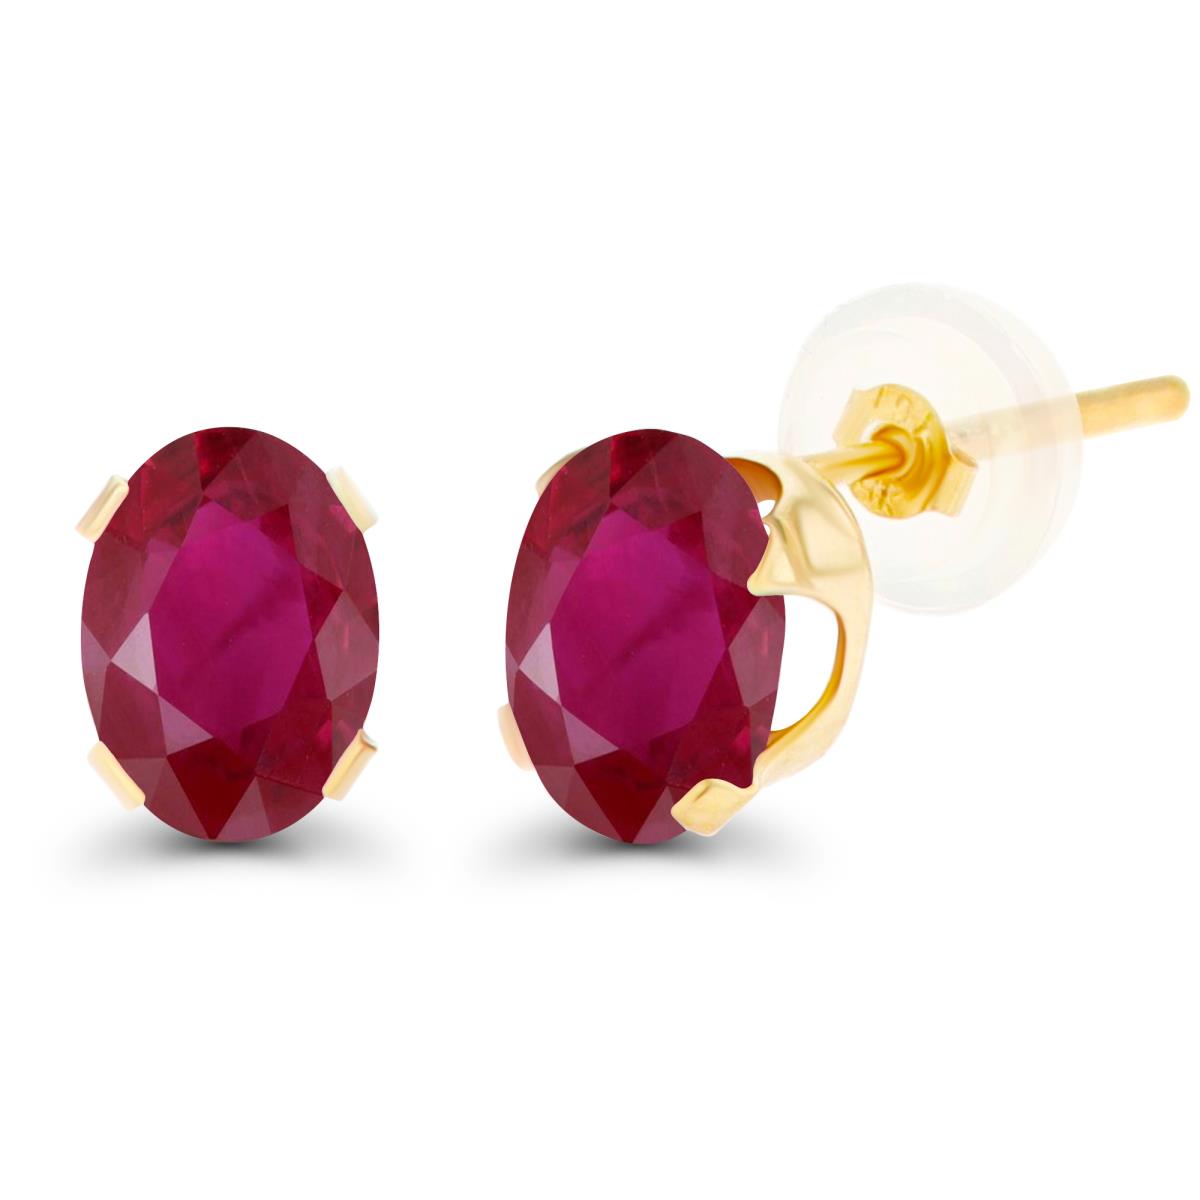 Sterling Silver Yellow 7x5mm Oval Glass Filled Ruby Stud Earring with Clutch